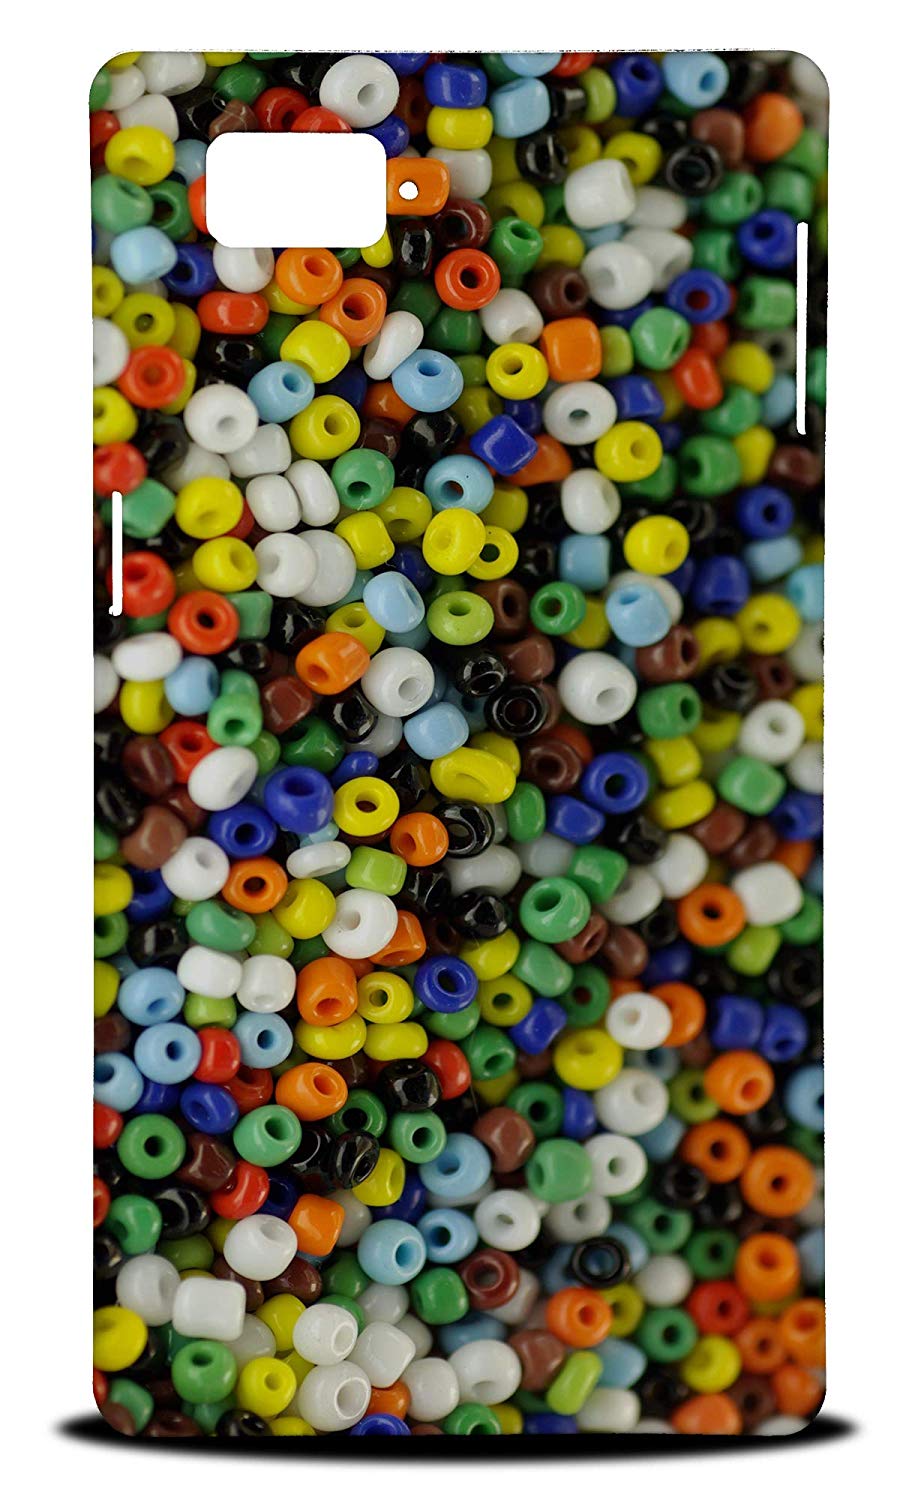 Beads Button Wallpaper Hard Phone Case Cover For Lenovo - Candy , HD Wallpaper & Backgrounds